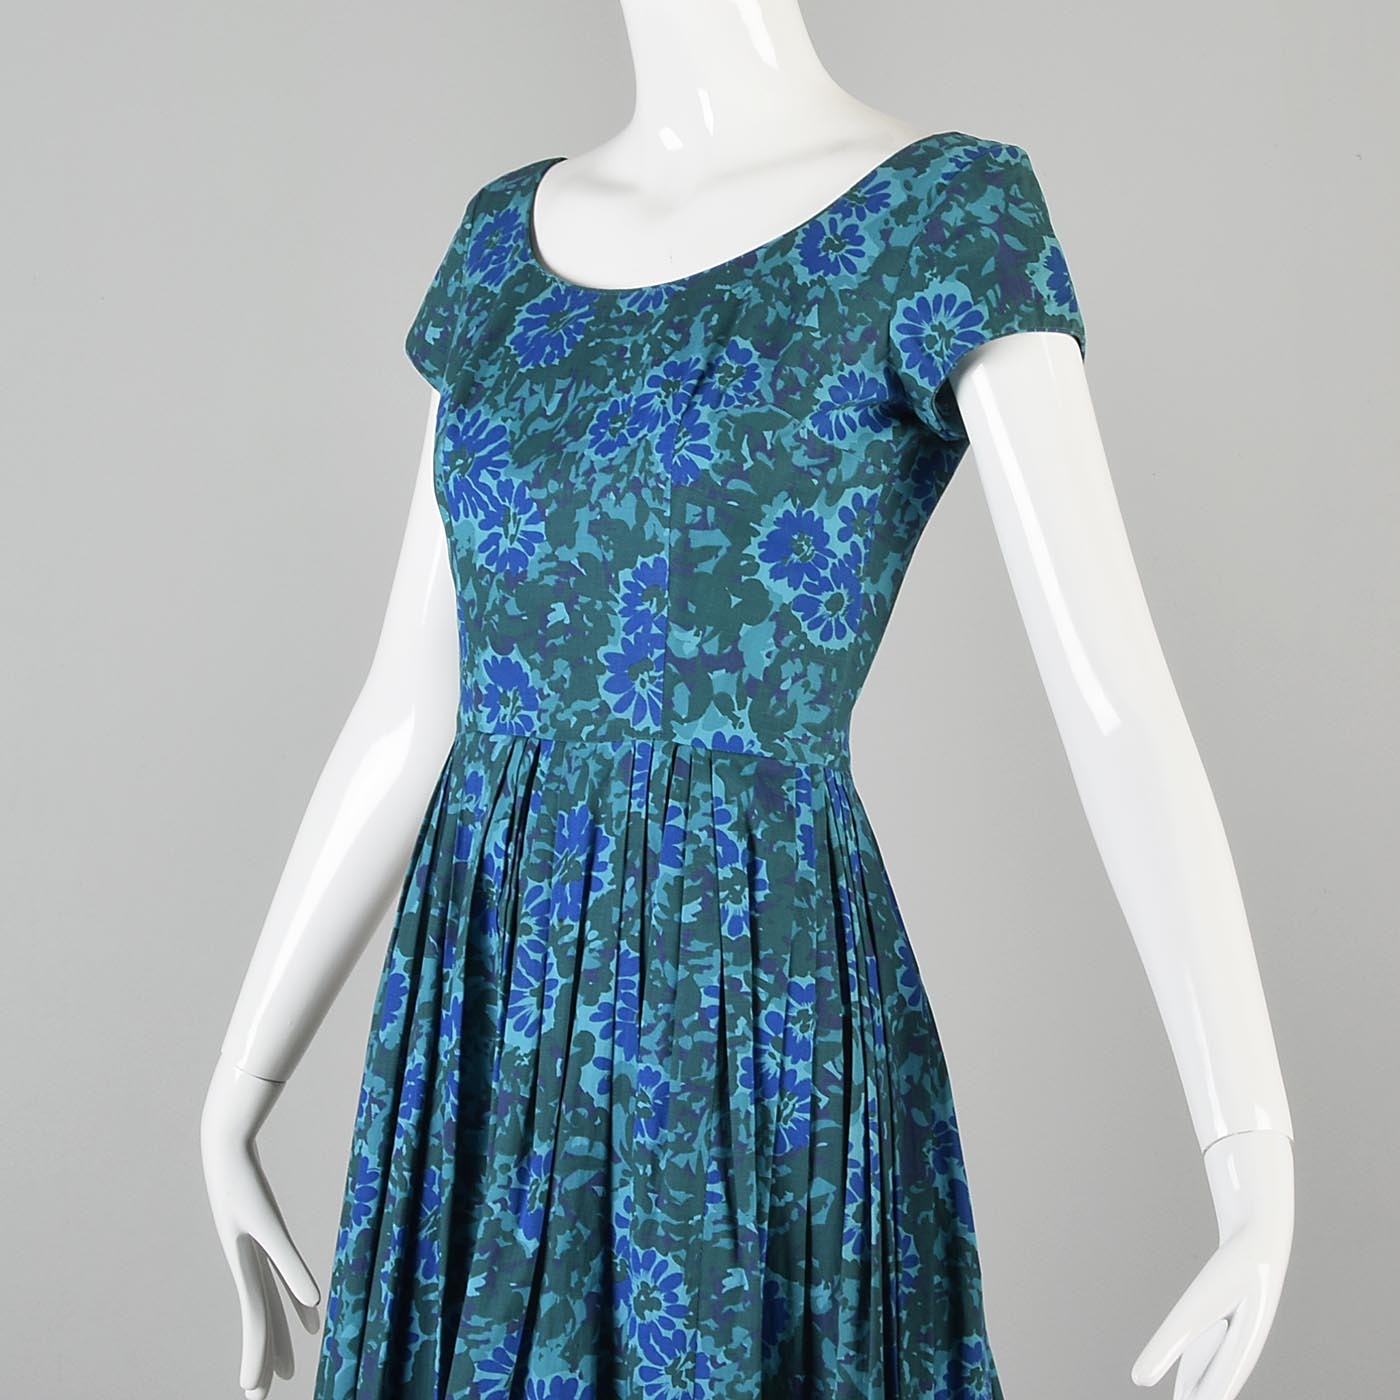 1950s Teal Fit and Flare Dress